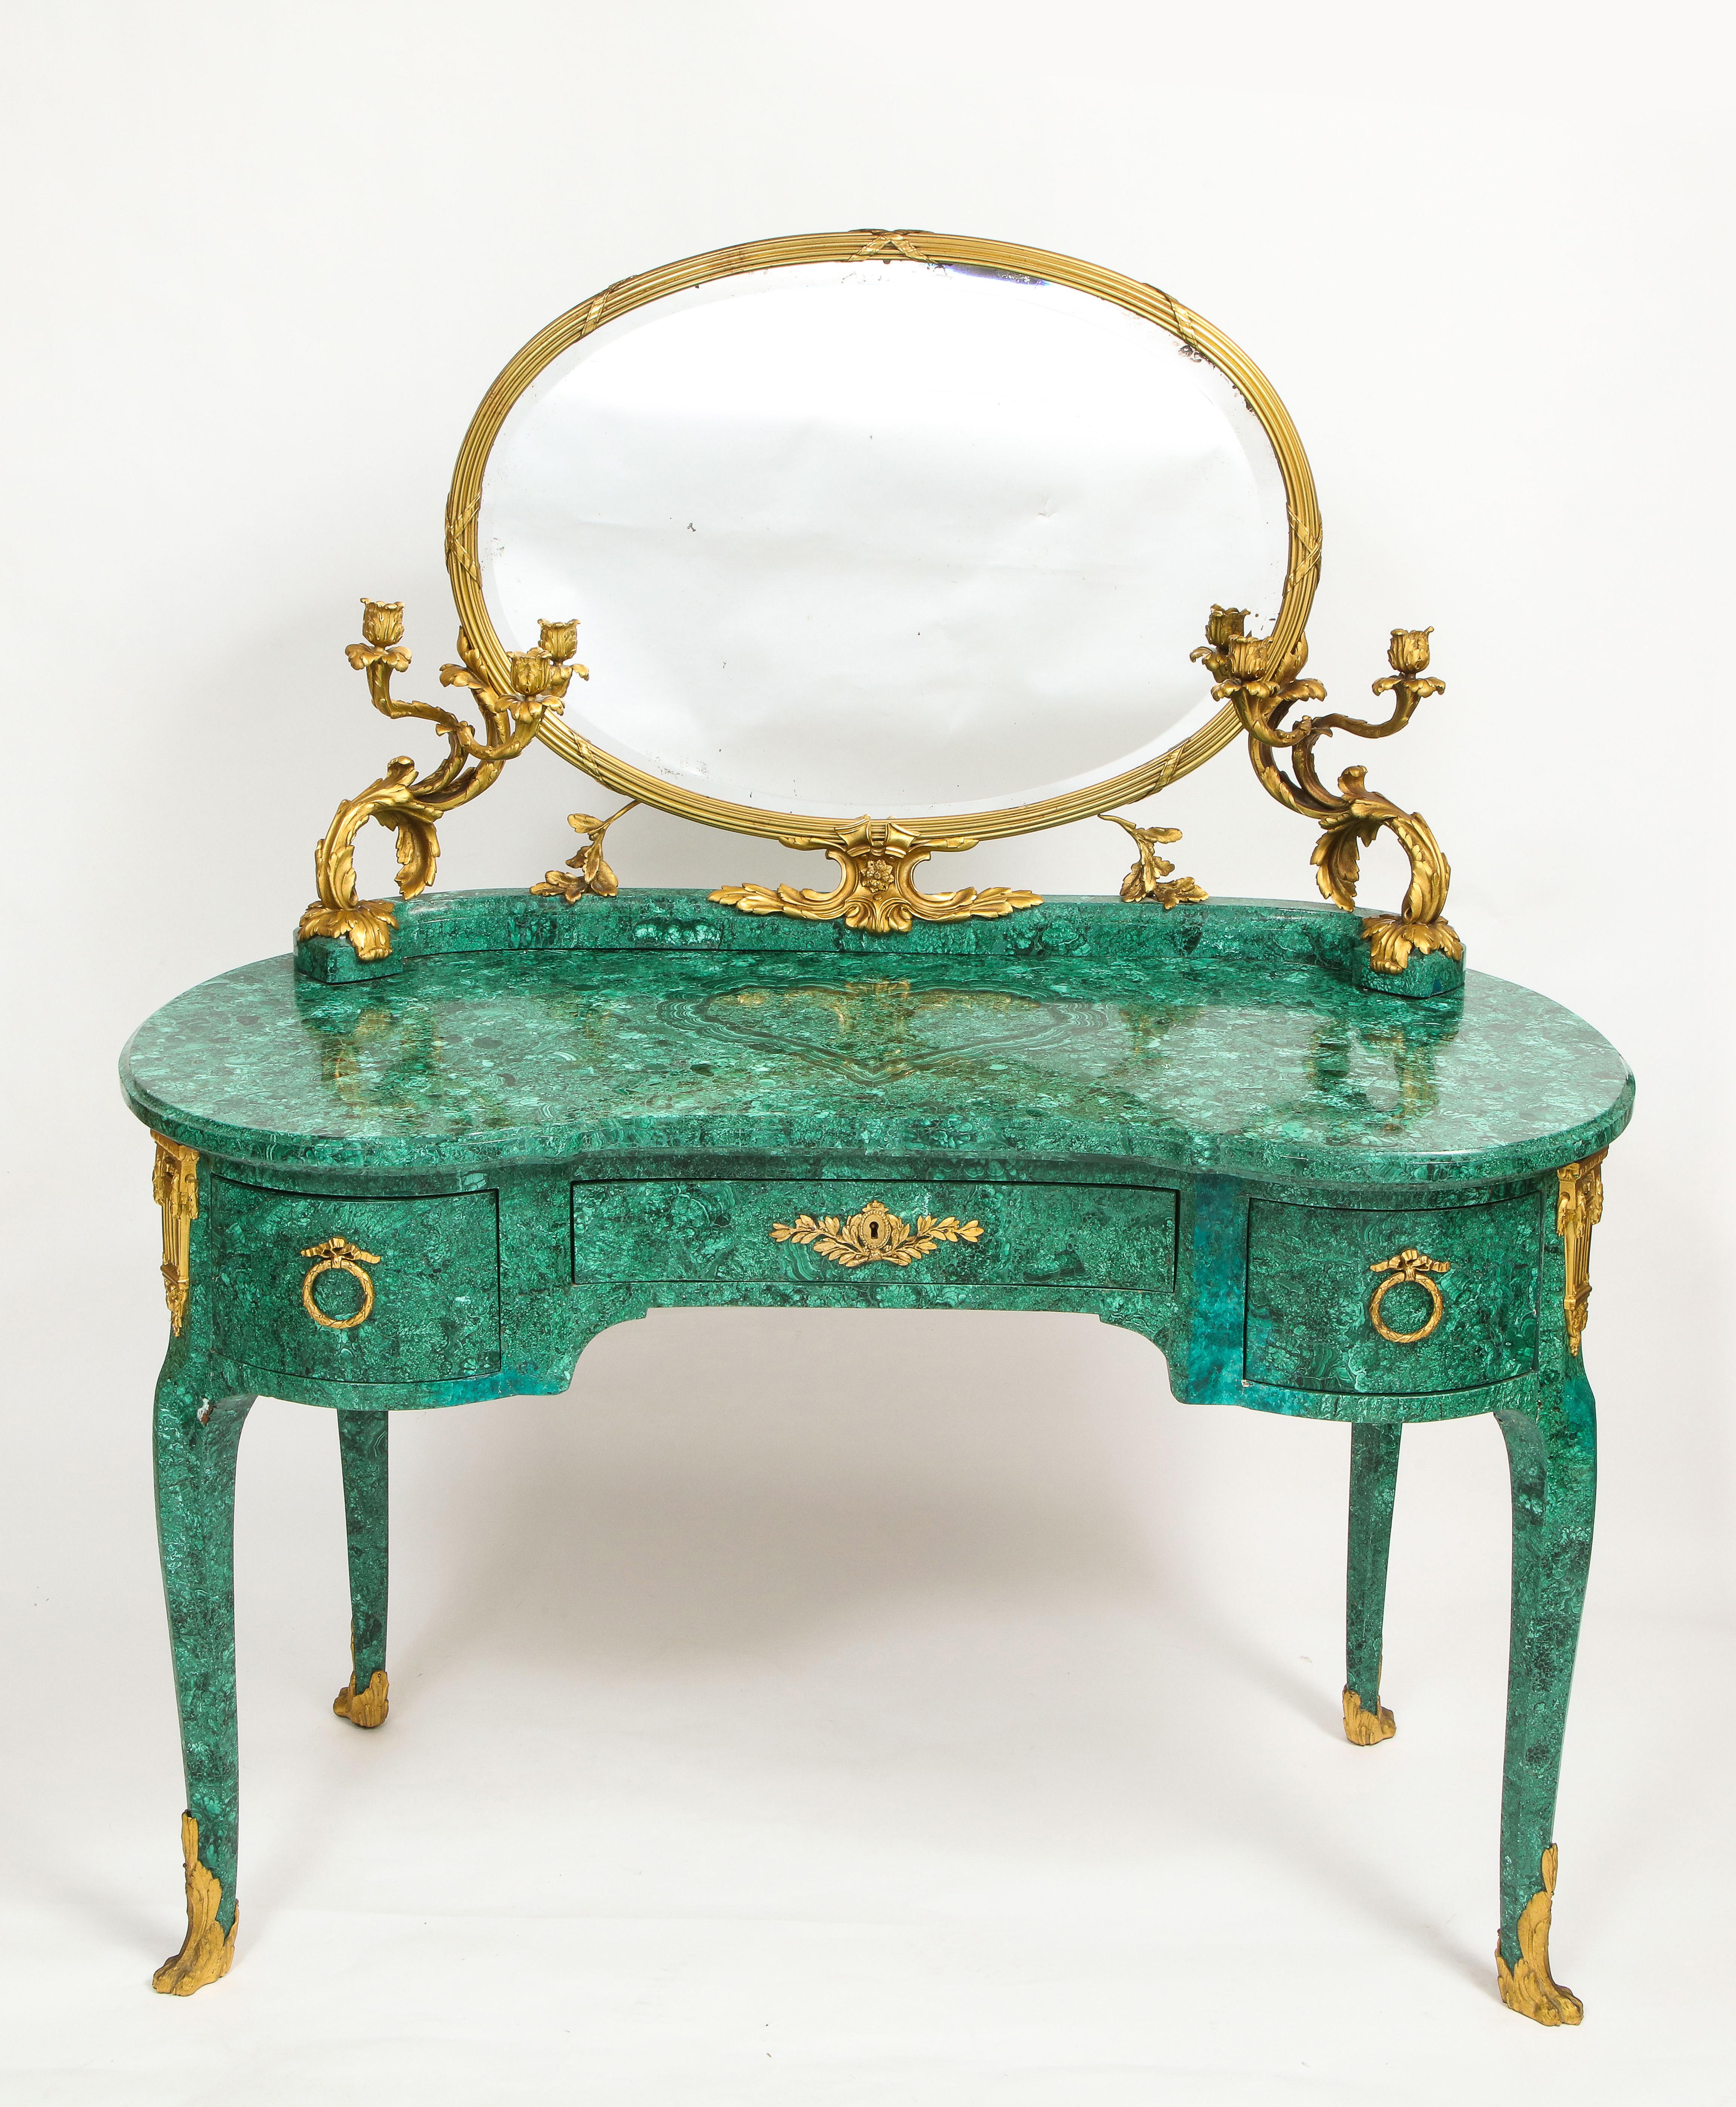 An Incredible and Spectacular 19th Century French Louis XVI Style Dore Bronze Mounted Mirrored Malachite Dresser with Candelabra arms.  The malachite body of the dresser is hand crafted from a semi-precious stone, highly sought after for its unique